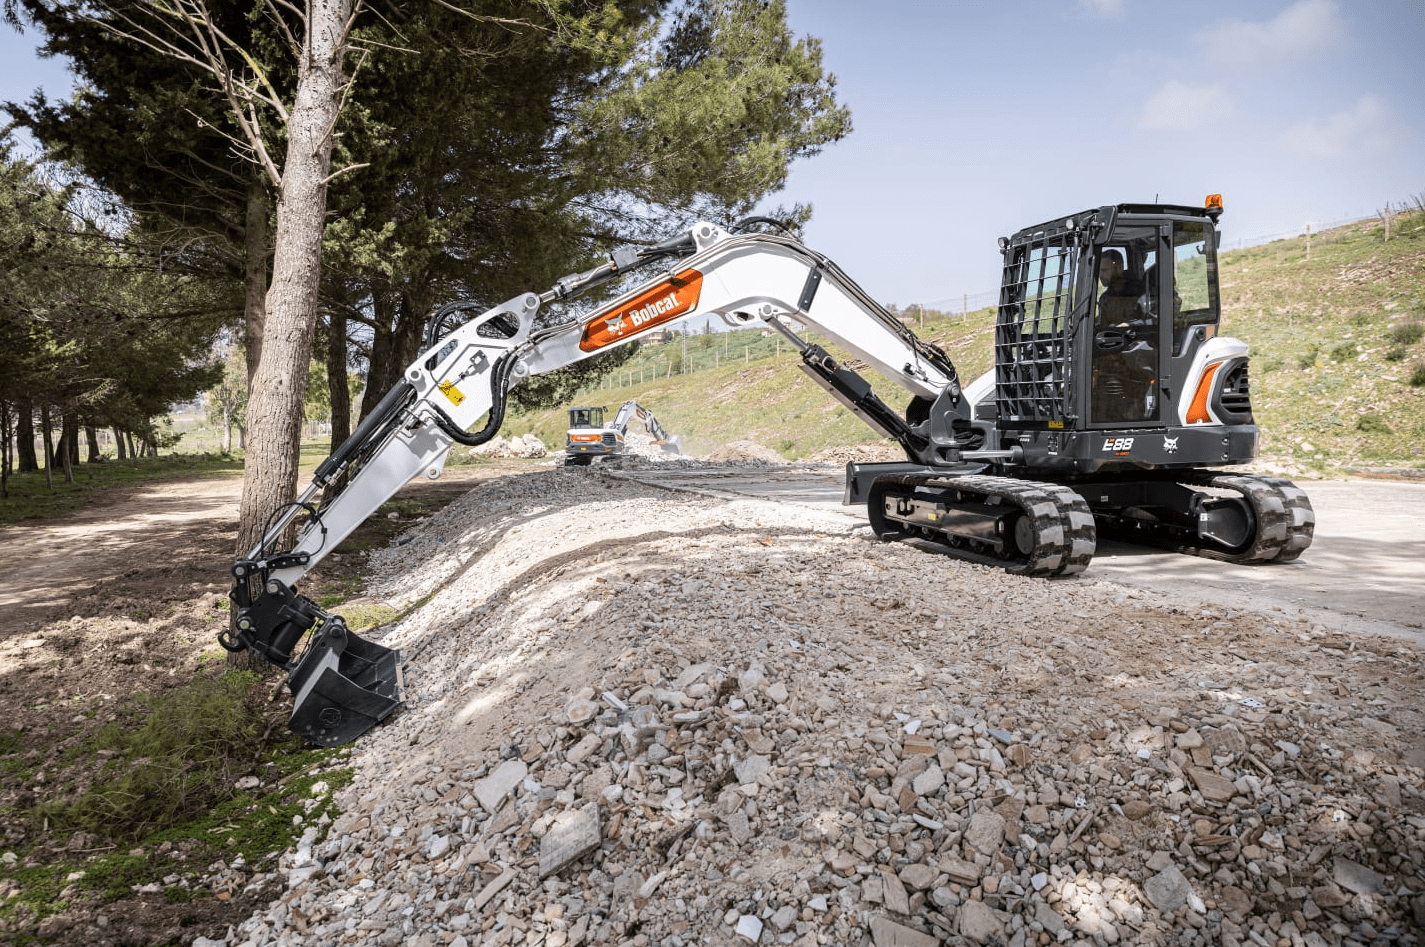 Browse Specs and more for the E88 Compact Excavator - Bobcat of the Rockies